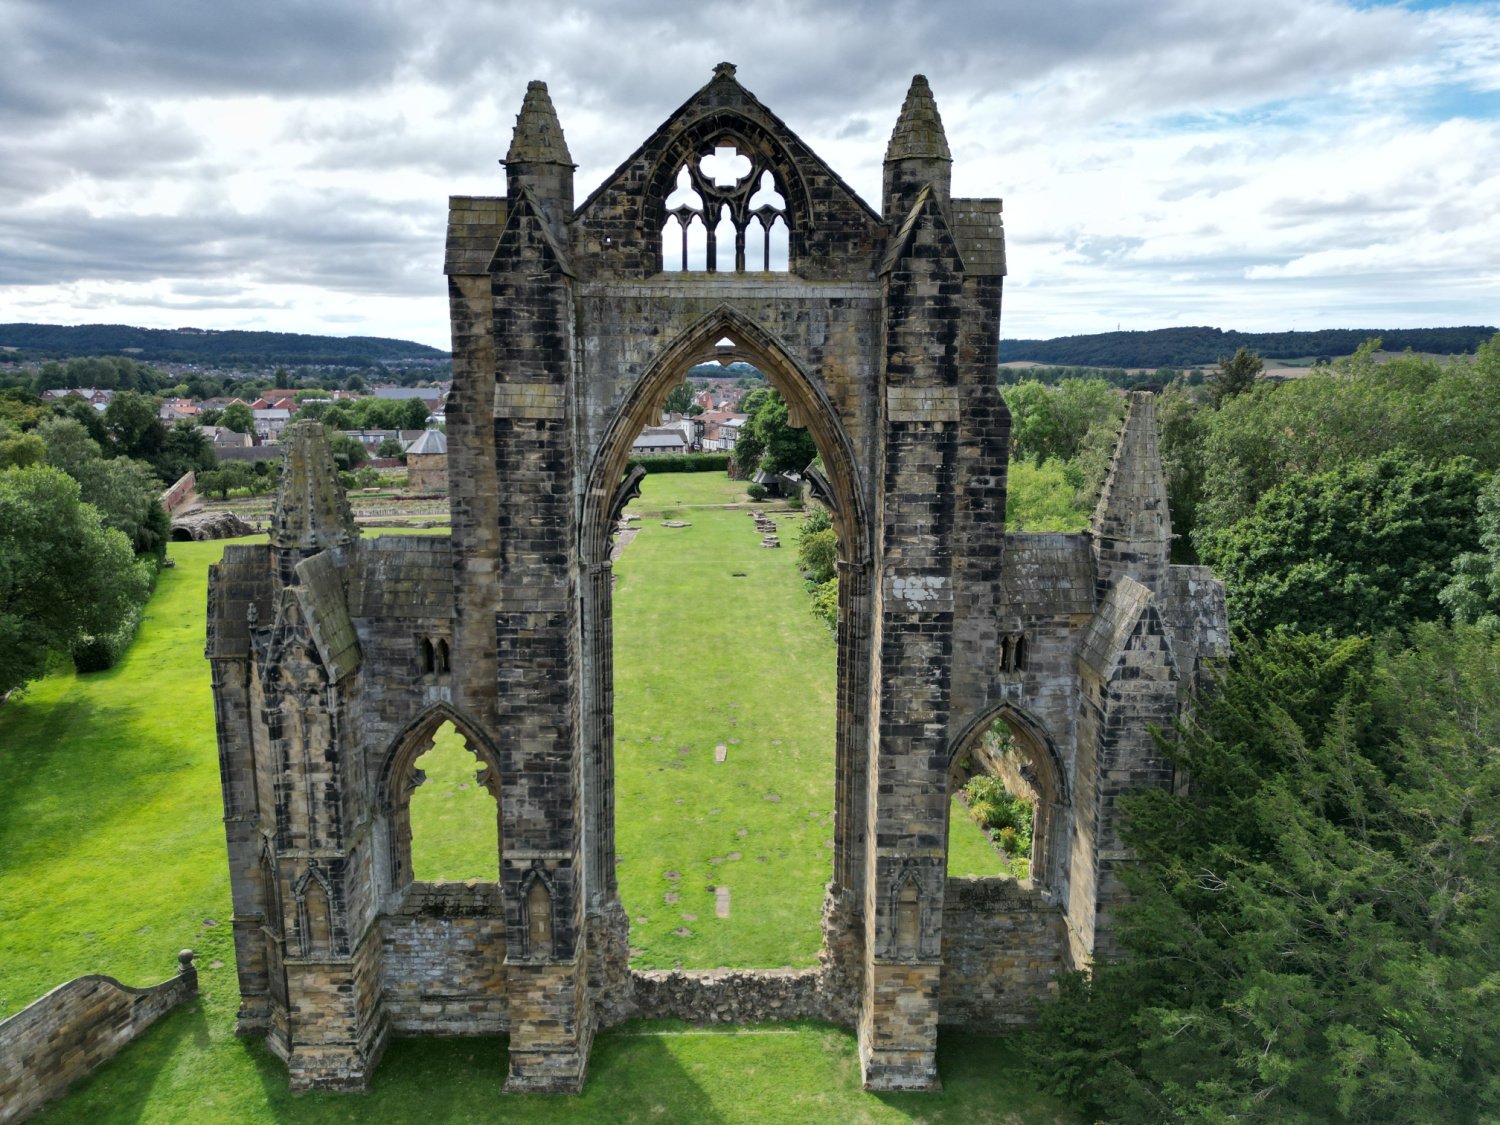 Image name guisborough priory north yorkshire the 8 image from the post A look at the history of Guisborough Priory, with Dr Emma Wells in Yorkshire.com.